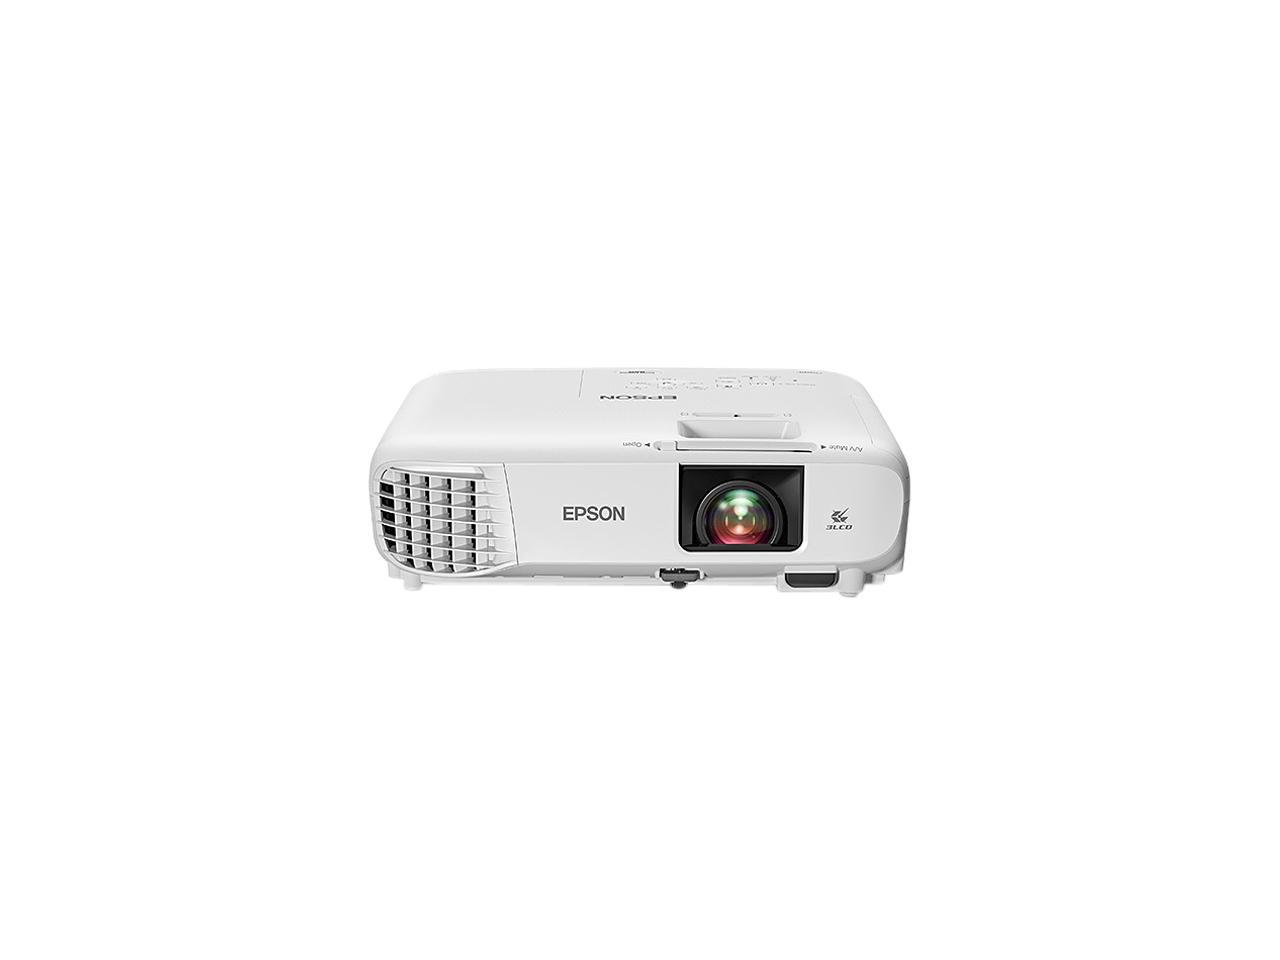 Epson Home Cinema 880 3LCD 1080p Projector, Built-in Speaker, 16,000:1 Contrast Ratio, HDMI - image 4 of 5